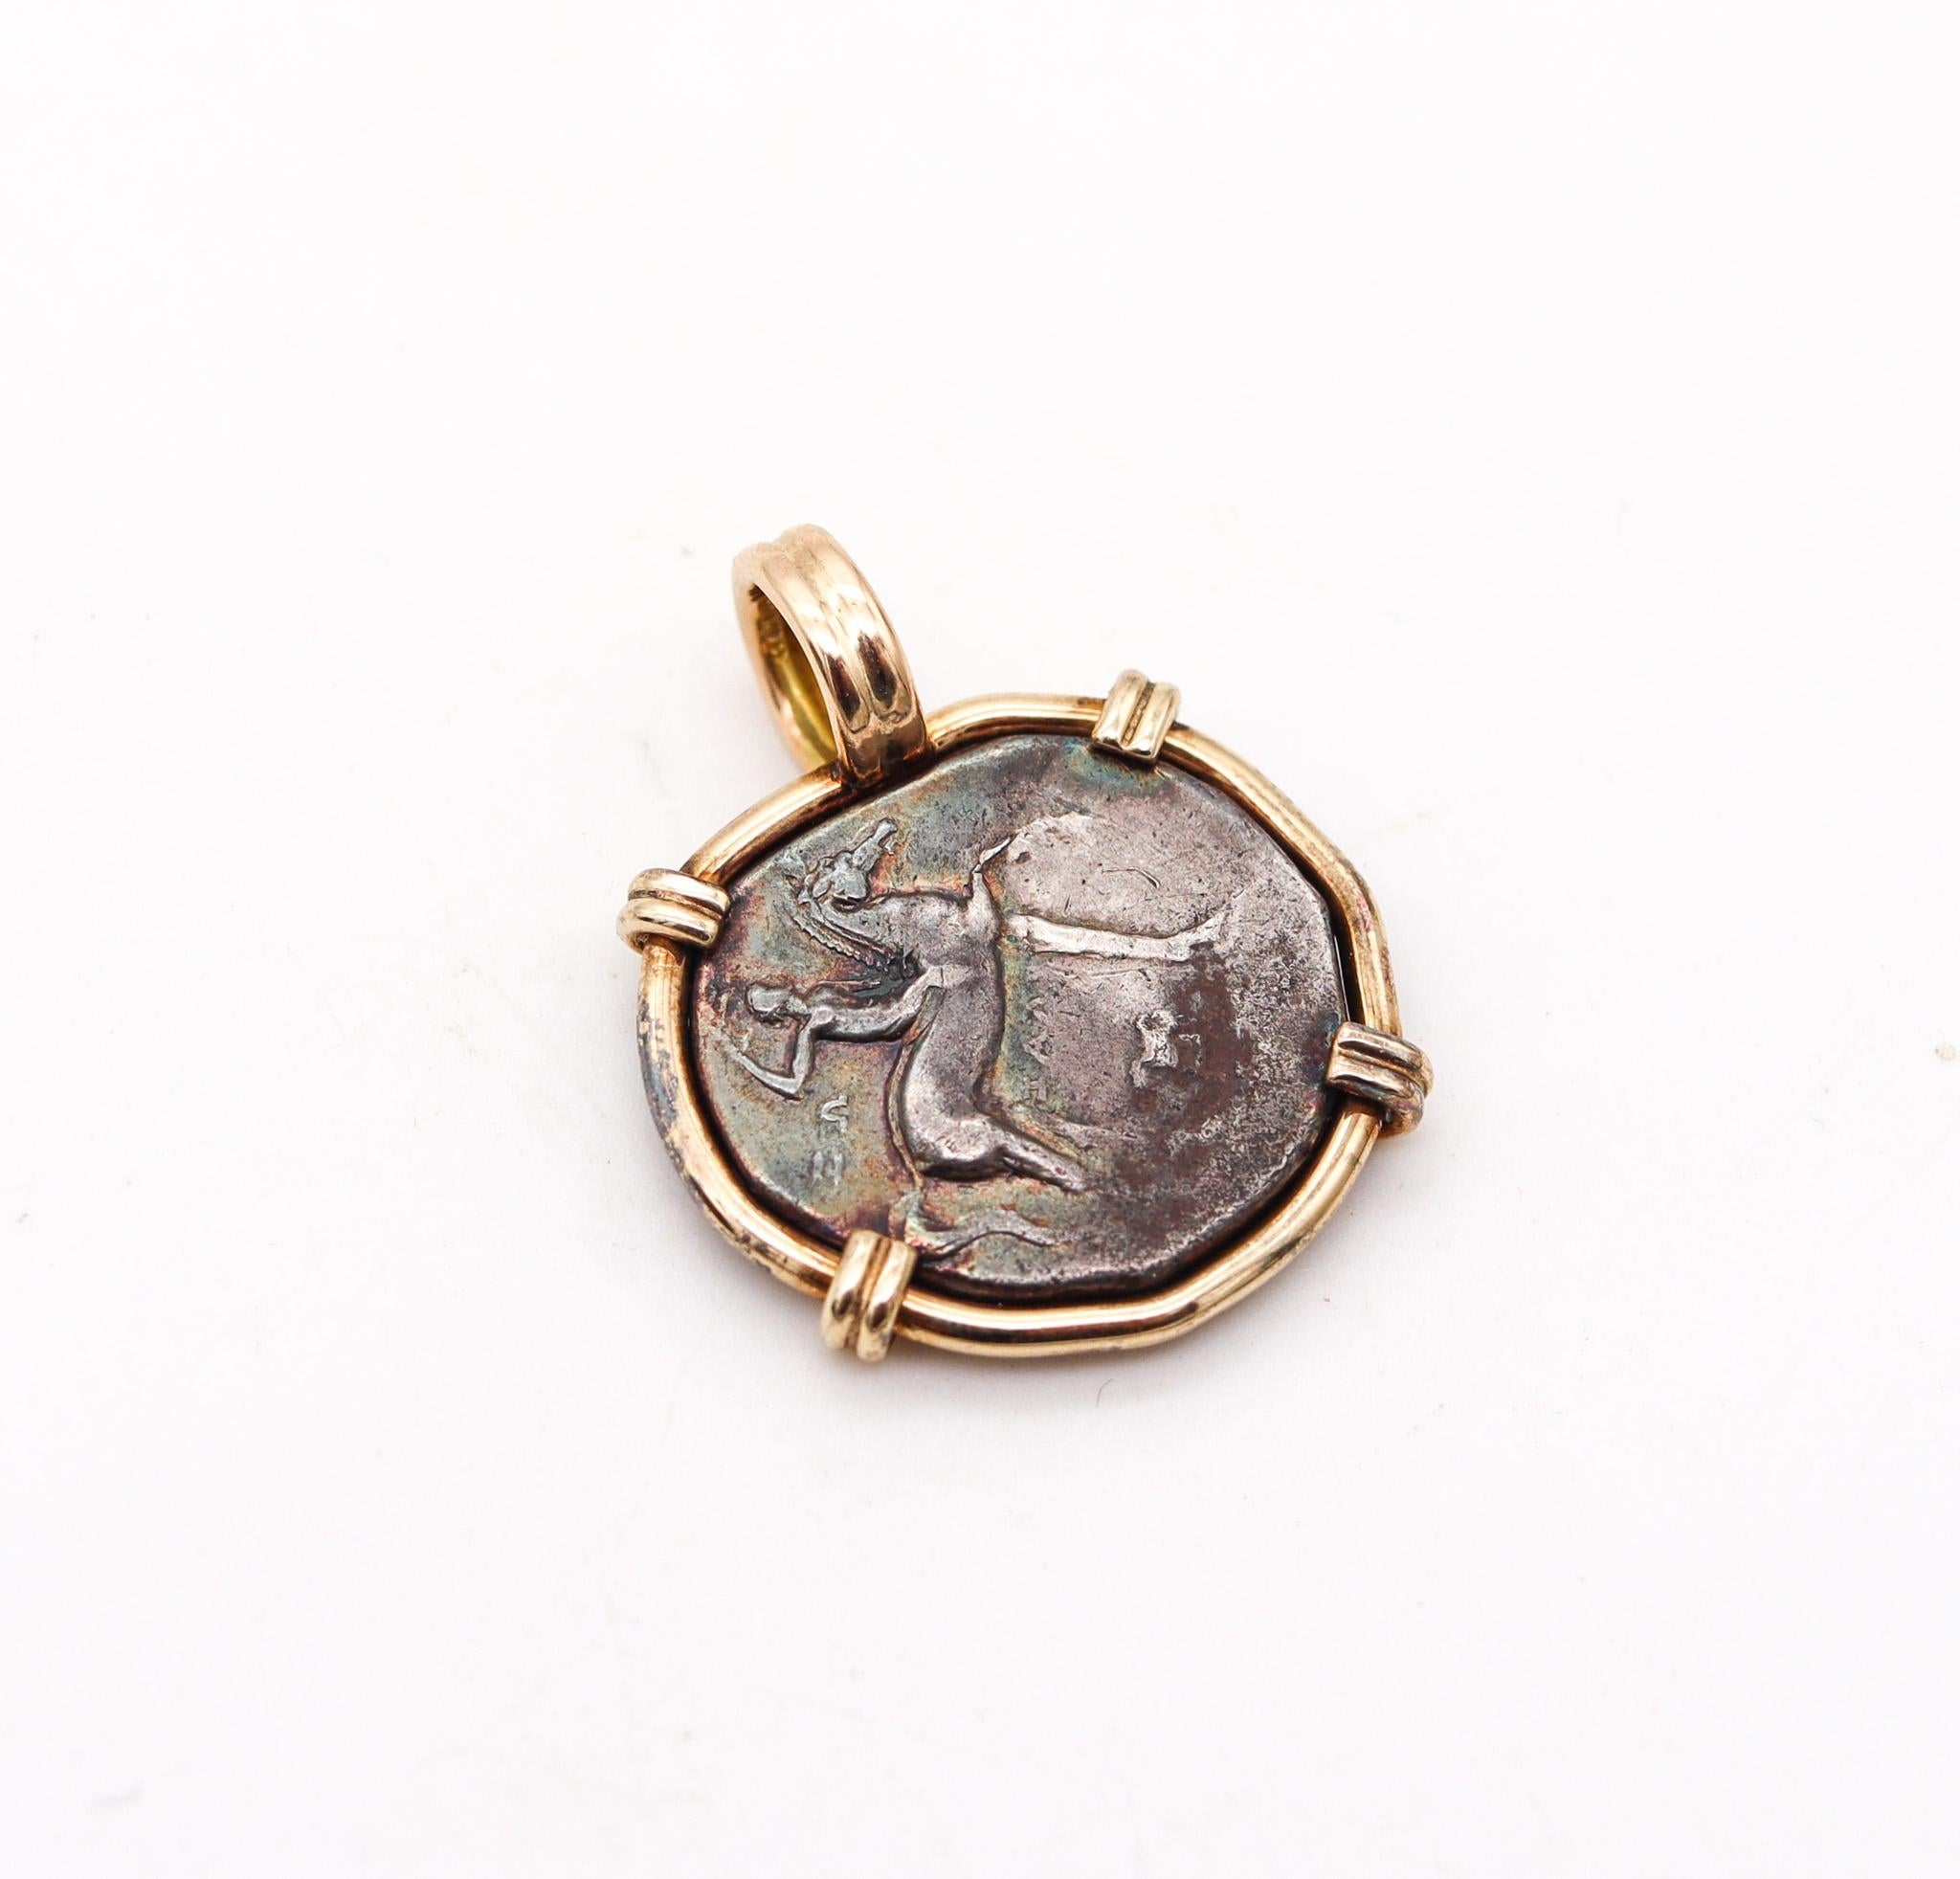 Boy riding a dolphin framed coin pendant.

An ancient silver coin of one Tarantine Stater struck between 280-240 BC in the Greek port city of Tarentum, located in Calabria in the very southern Italy. This ancient coin has been carefully mounted in a